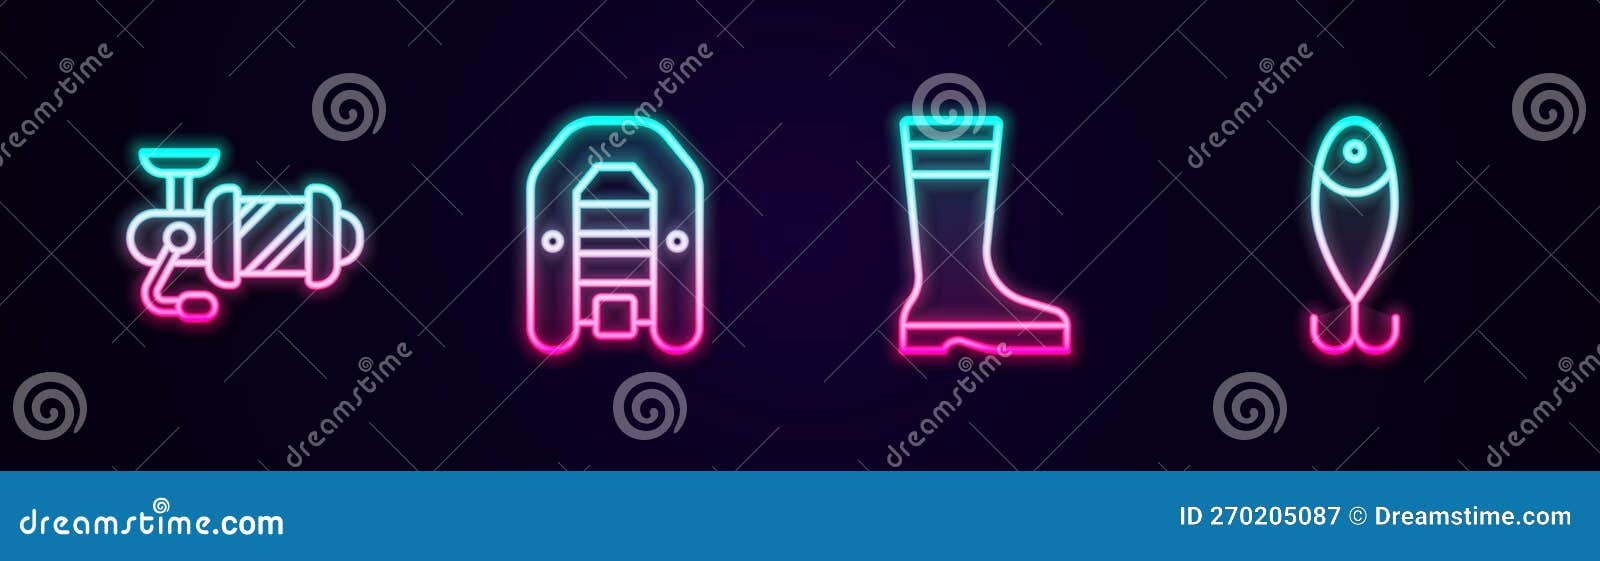 https://thumbs.dreamstime.com/z/set-line-spinning-reel-fishing-inflatable-boat-motor-fishing-boots-lure-glowing-neon-icon-vector-set-line-spinning-270205087.jpg